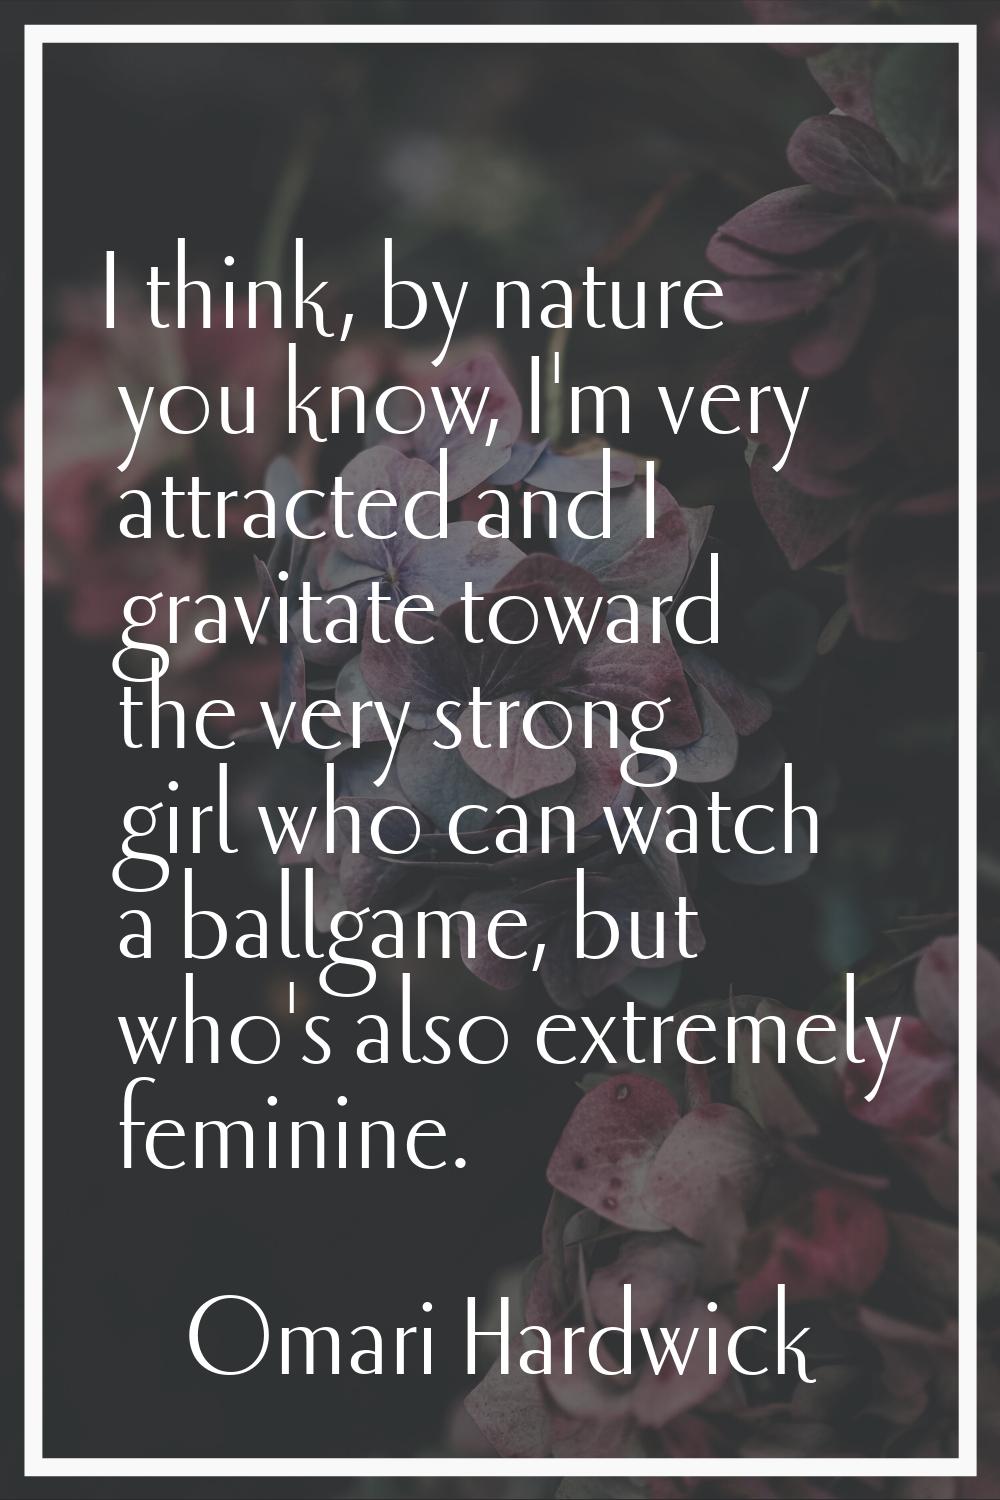 I think, by nature you know, I'm very attracted and I gravitate toward the very strong girl who can